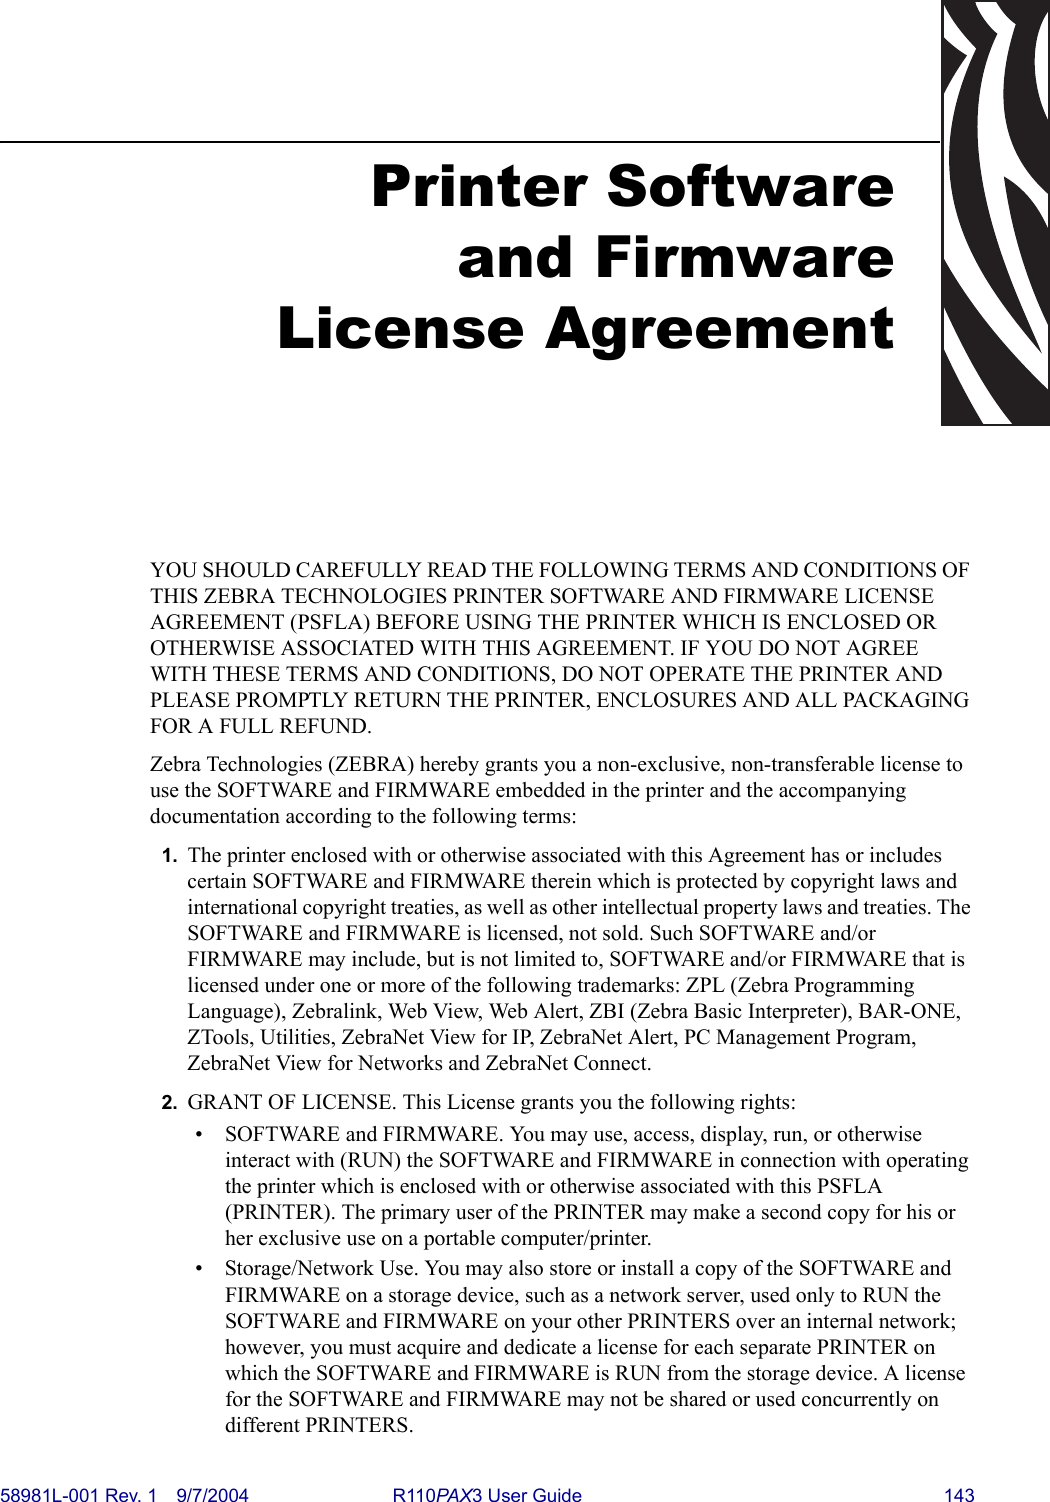 58981L-001 Rev. 1 9/7/2004 R110PAX3 User Guide 143Printer Softwareand FirmwareLicense AgreementYOU SHOULD CAREFULLY READ THE FOLLOWING TERMS AND CONDITIONS OF THIS ZEBRA TECHNOLOGIES PRINTER SOFTWARE AND FIRMWARE LICENSE AGREEMENT (PSFLA) BEFORE USING THE PRINTER WHICH IS ENCLOSED OR OTHERWISE ASSOCIATED WITH THIS AGREEMENT. IF YOU DO NOT AGREE WITH THESE TERMS AND CONDITIONS, DO NOT OPERATE THE PRINTER AND PLEASE PROMPTLY RETURN THE PRINTER, ENCLOSURES AND ALL PACKAGING FOR A FULL REFUND.Zebra Technologies (ZEBRA) hereby grants you a non-exclusive, non-transferable license to use the SOFTWARE and FIRMWARE embedded in the printer and the accompanying documentation according to the following terms:1. The printer enclosed with or otherwise associated with this Agreement has or includes certain SOFTWARE and FIRMWARE therein which is protected by copyright laws and international copyright treaties, as well as other intellectual property laws and treaties. The SOFTWARE and FIRMWARE is licensed, not sold. Such SOFTWARE and/or FIRMWARE may include, but is not limited to, SOFTWARE and/or FIRMWARE that is licensed under one or more of the following trademarks: ZPL (Zebra Programming Language), Zebralink, Web View, Web Alert, ZBI (Zebra Basic Interpreter), BAR-ONE, ZTools, Utilities, ZebraNet View for IP, ZebraNet Alert, PC Management Program, ZebraNet View for Networks and ZebraNet Connect. 2. GRANT OF LICENSE. This License grants you the following rights:• SOFTWARE and FIRMWARE. You may use, access, display, run, or otherwise interact with (RUN) the SOFTWARE and FIRMWARE in connection with operating the printer which is enclosed with or otherwise associated with this PSFLA (PRINTER). The primary user of the PRINTER may make a second copy for his or her exclusive use on a portable computer/printer.• Storage/Network Use. You may also store or install a copy of the SOFTWARE and FIRMWARE on a storage device, such as a network server, used only to RUN the SOFTWARE and FIRMWARE on your other PRINTERS over an internal network; however, you must acquire and dedicate a license for each separate PRINTER on which the SOFTWARE and FIRMWARE is RUN from the storage device. A license for the SOFTWARE and FIRMWARE may not be shared or used concurrently on different PRINTERS.